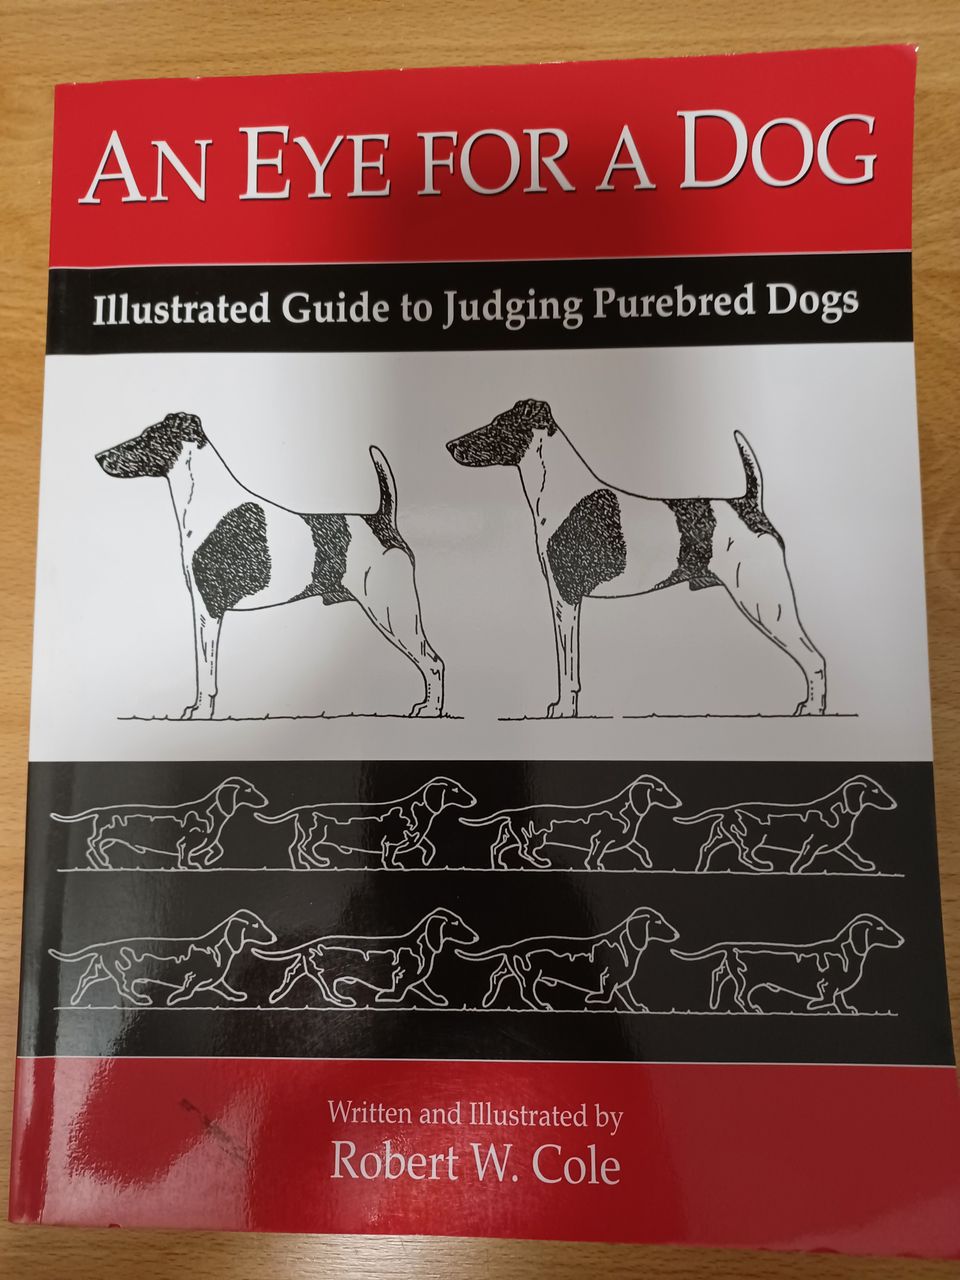 KIRJA: An Eye for a Dog: Illustrated Guide to Judging